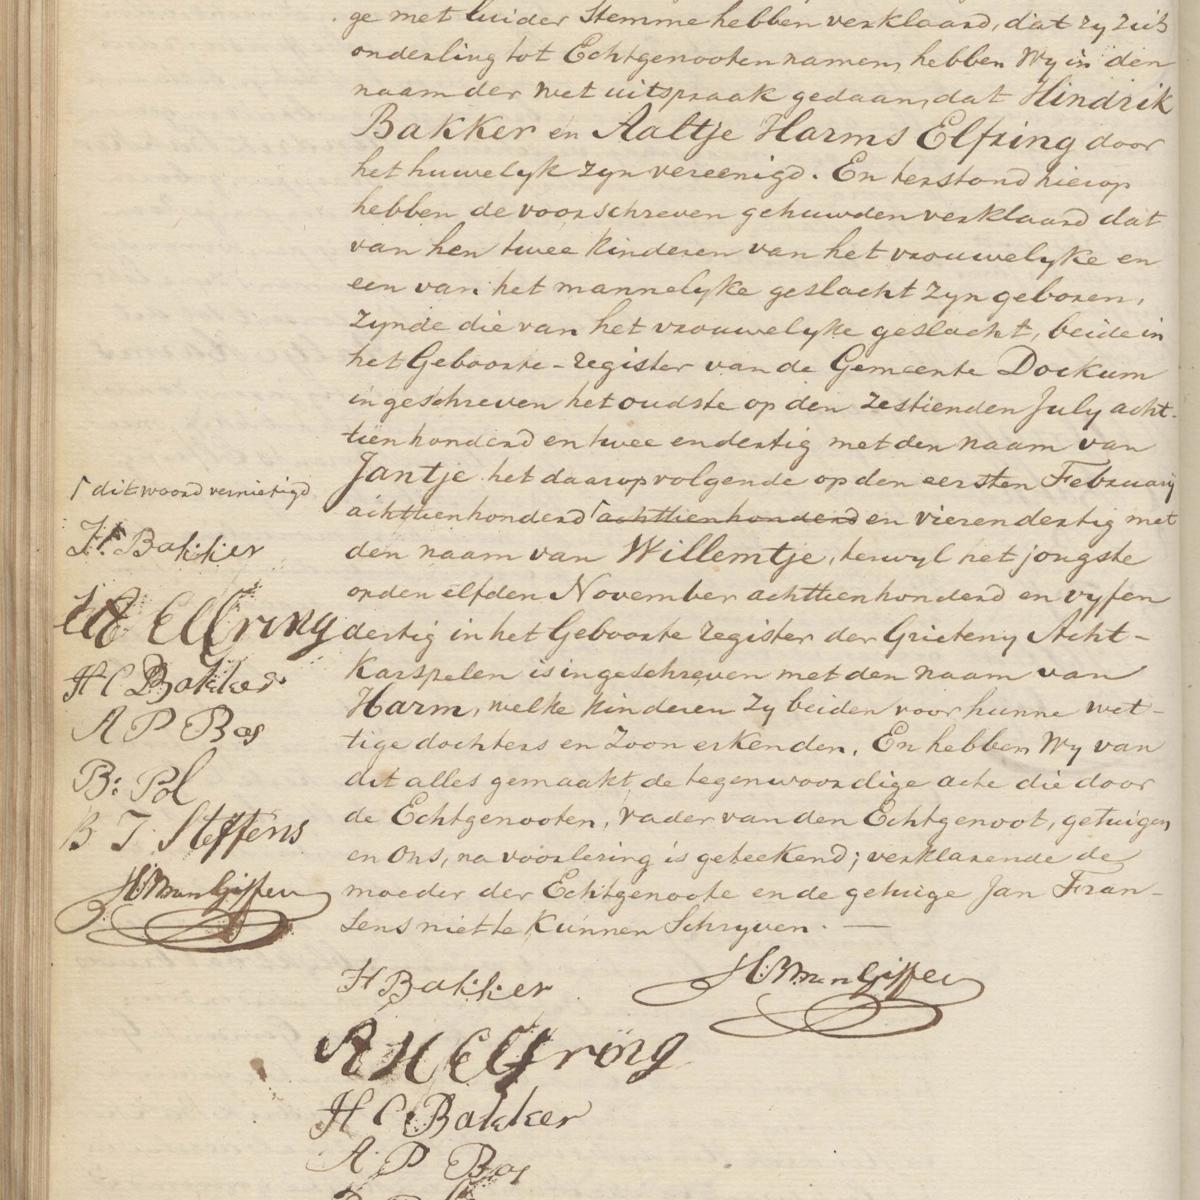 Civil registry of marriages, Groningen, 1836, record 232, page 2